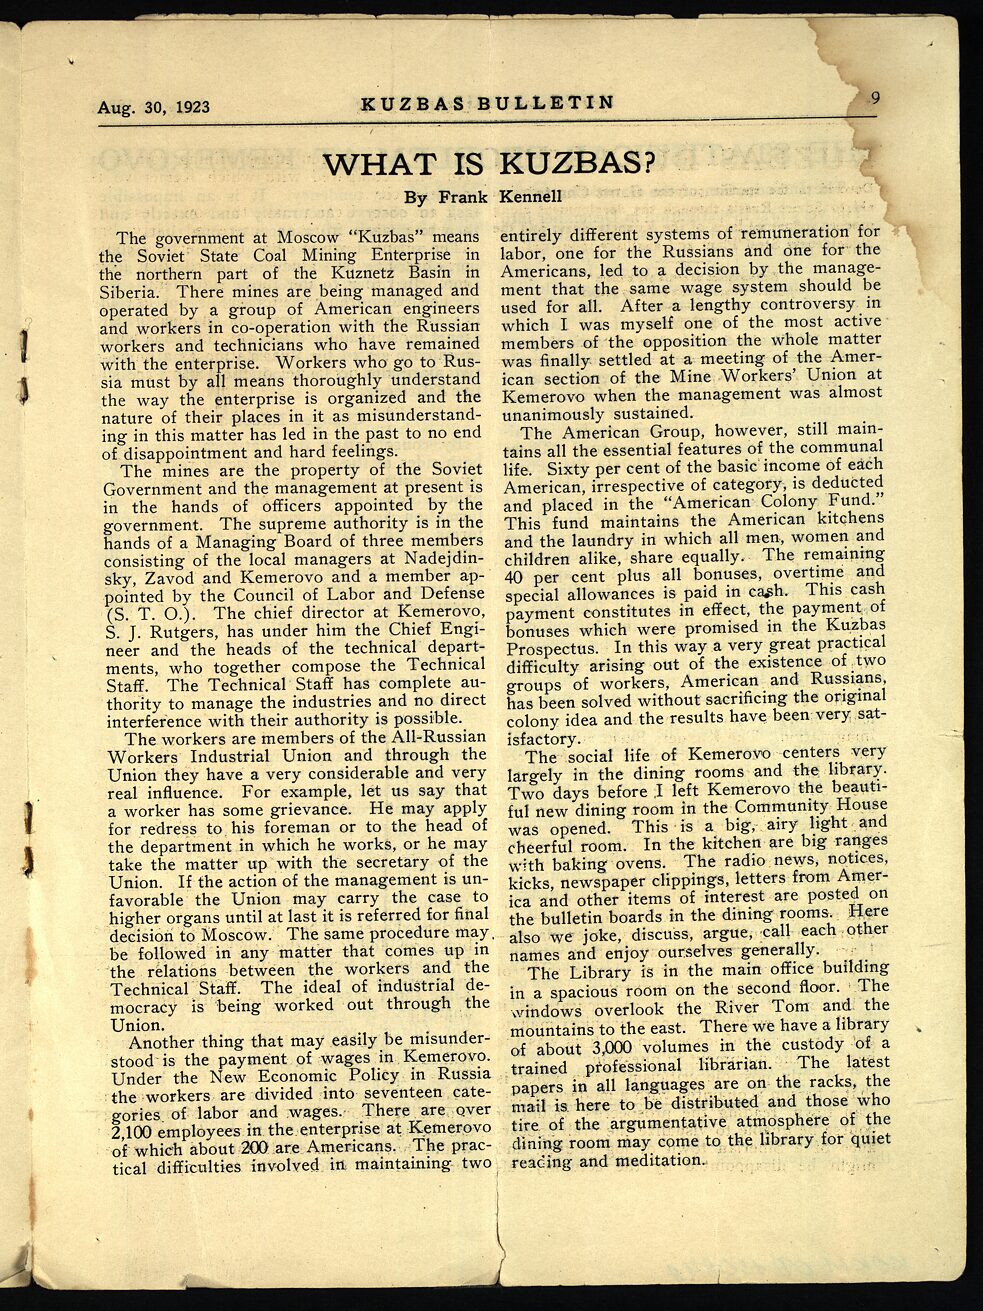 Bulletin Kuzbas, vol. 2, issue 3, page 9. Article “What is Kuzbas?”. New York. Written by F. Kennell // 1923